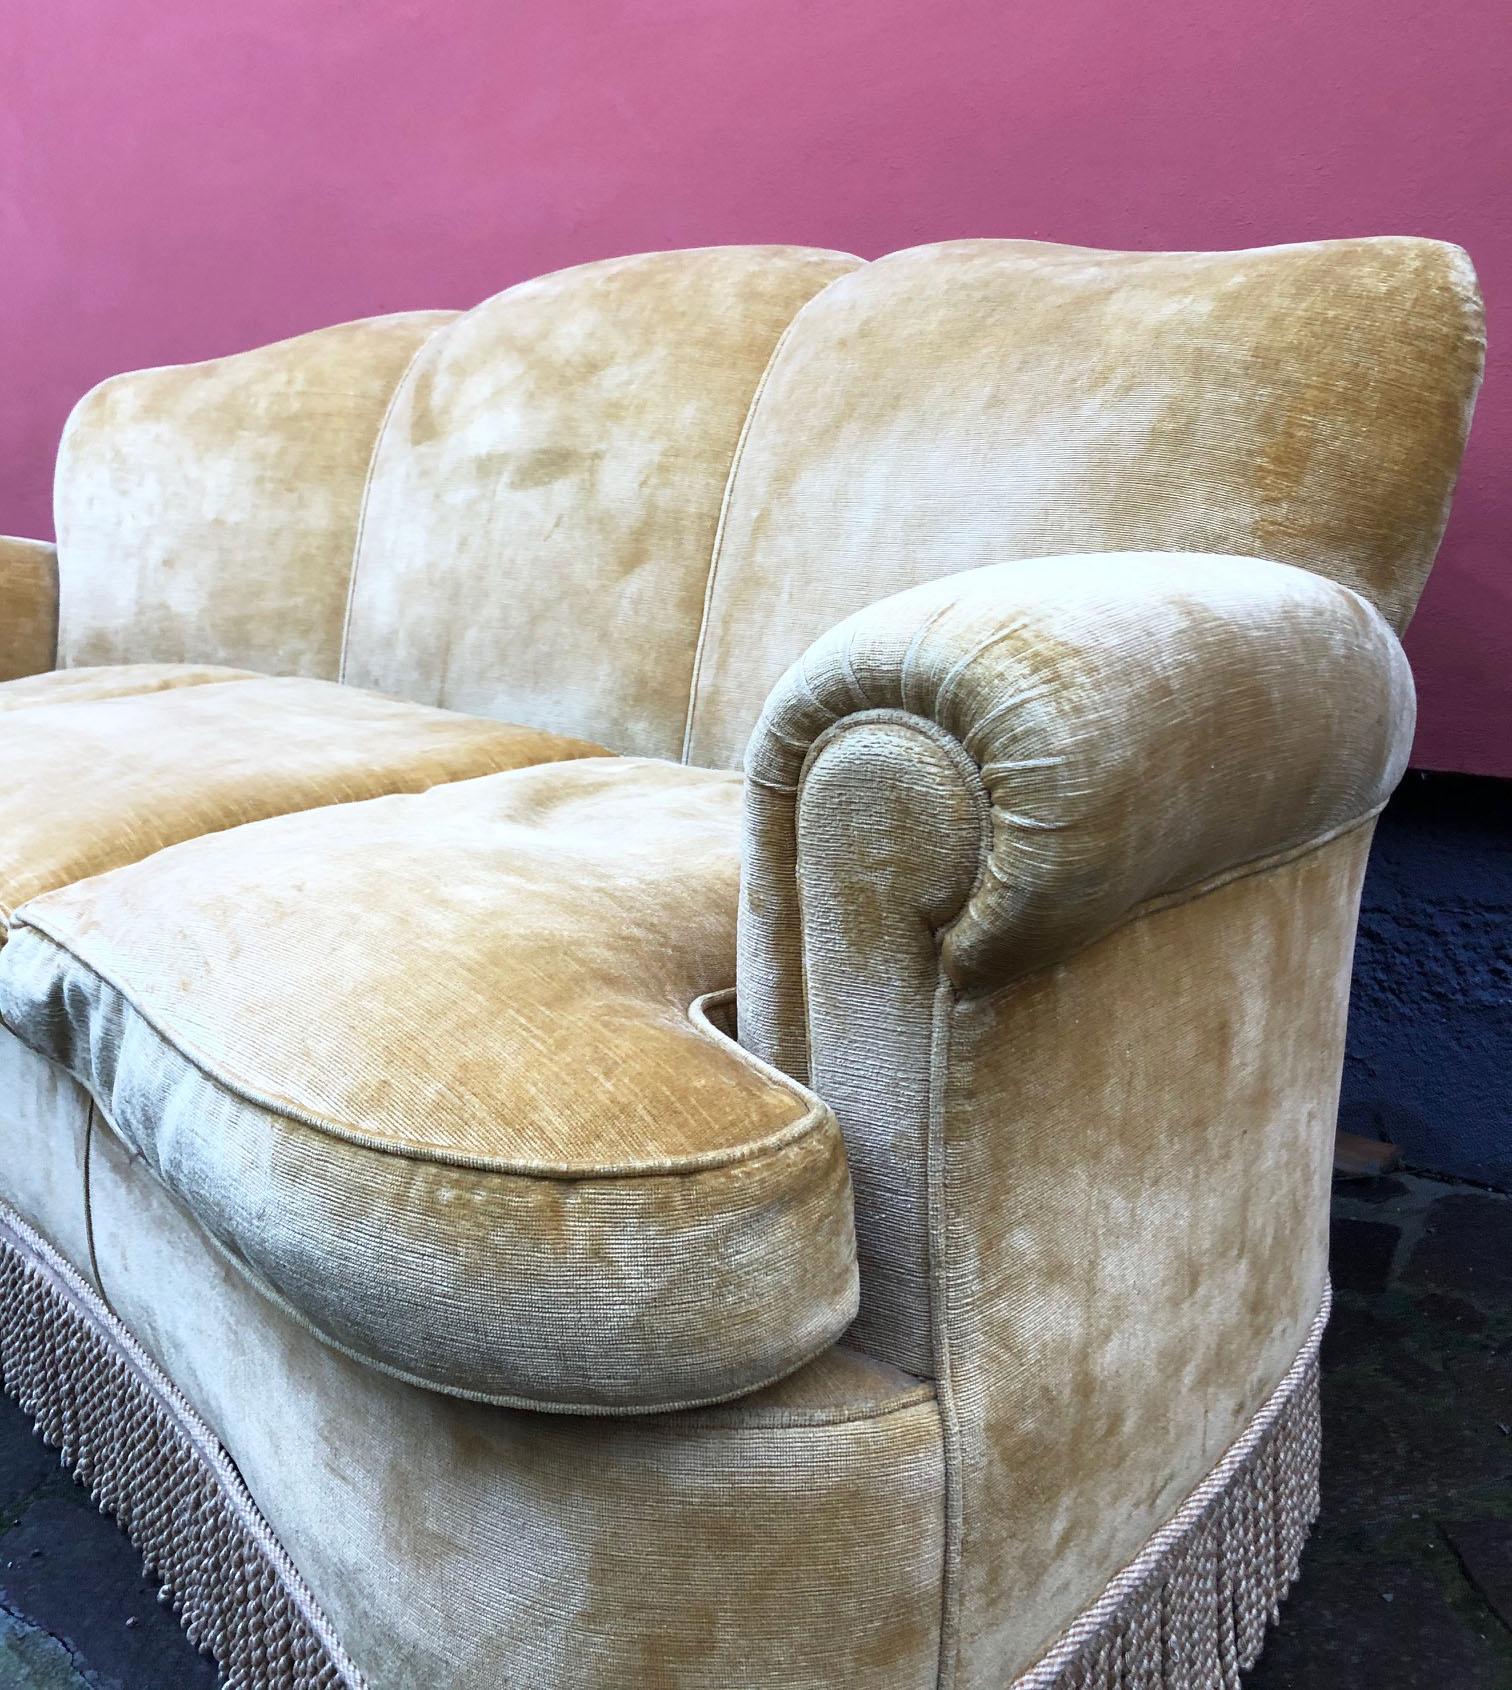 Original 1920s ocher color, Art Deco style, velvet sofa, three-seat.
Very convenient and comfortable.
It has a curved shape.
The transport quote for the USA and Canada is customized according to the destination, make the request with zip code and